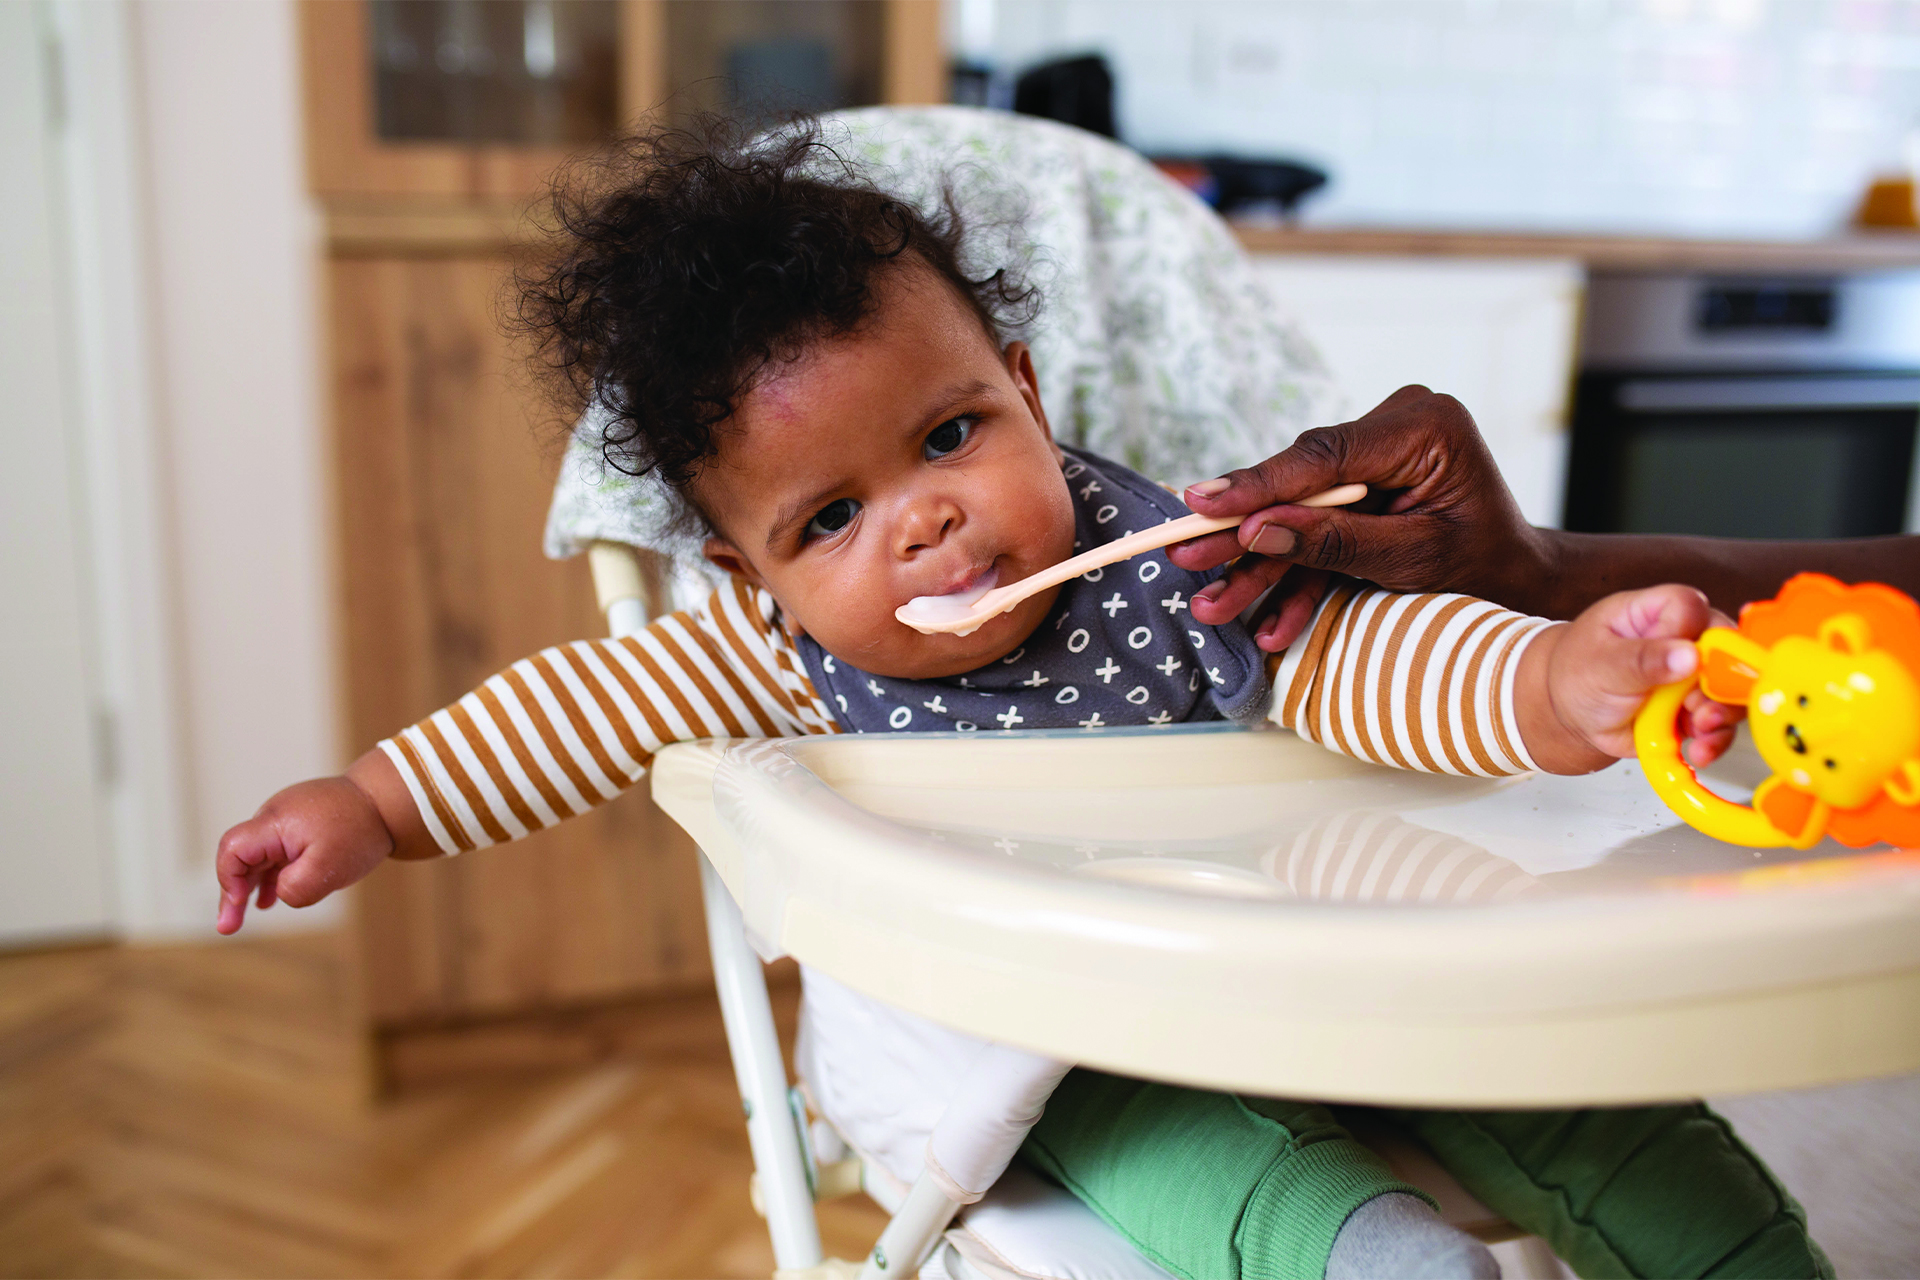 Q&A: Starting Solid Foods Safely